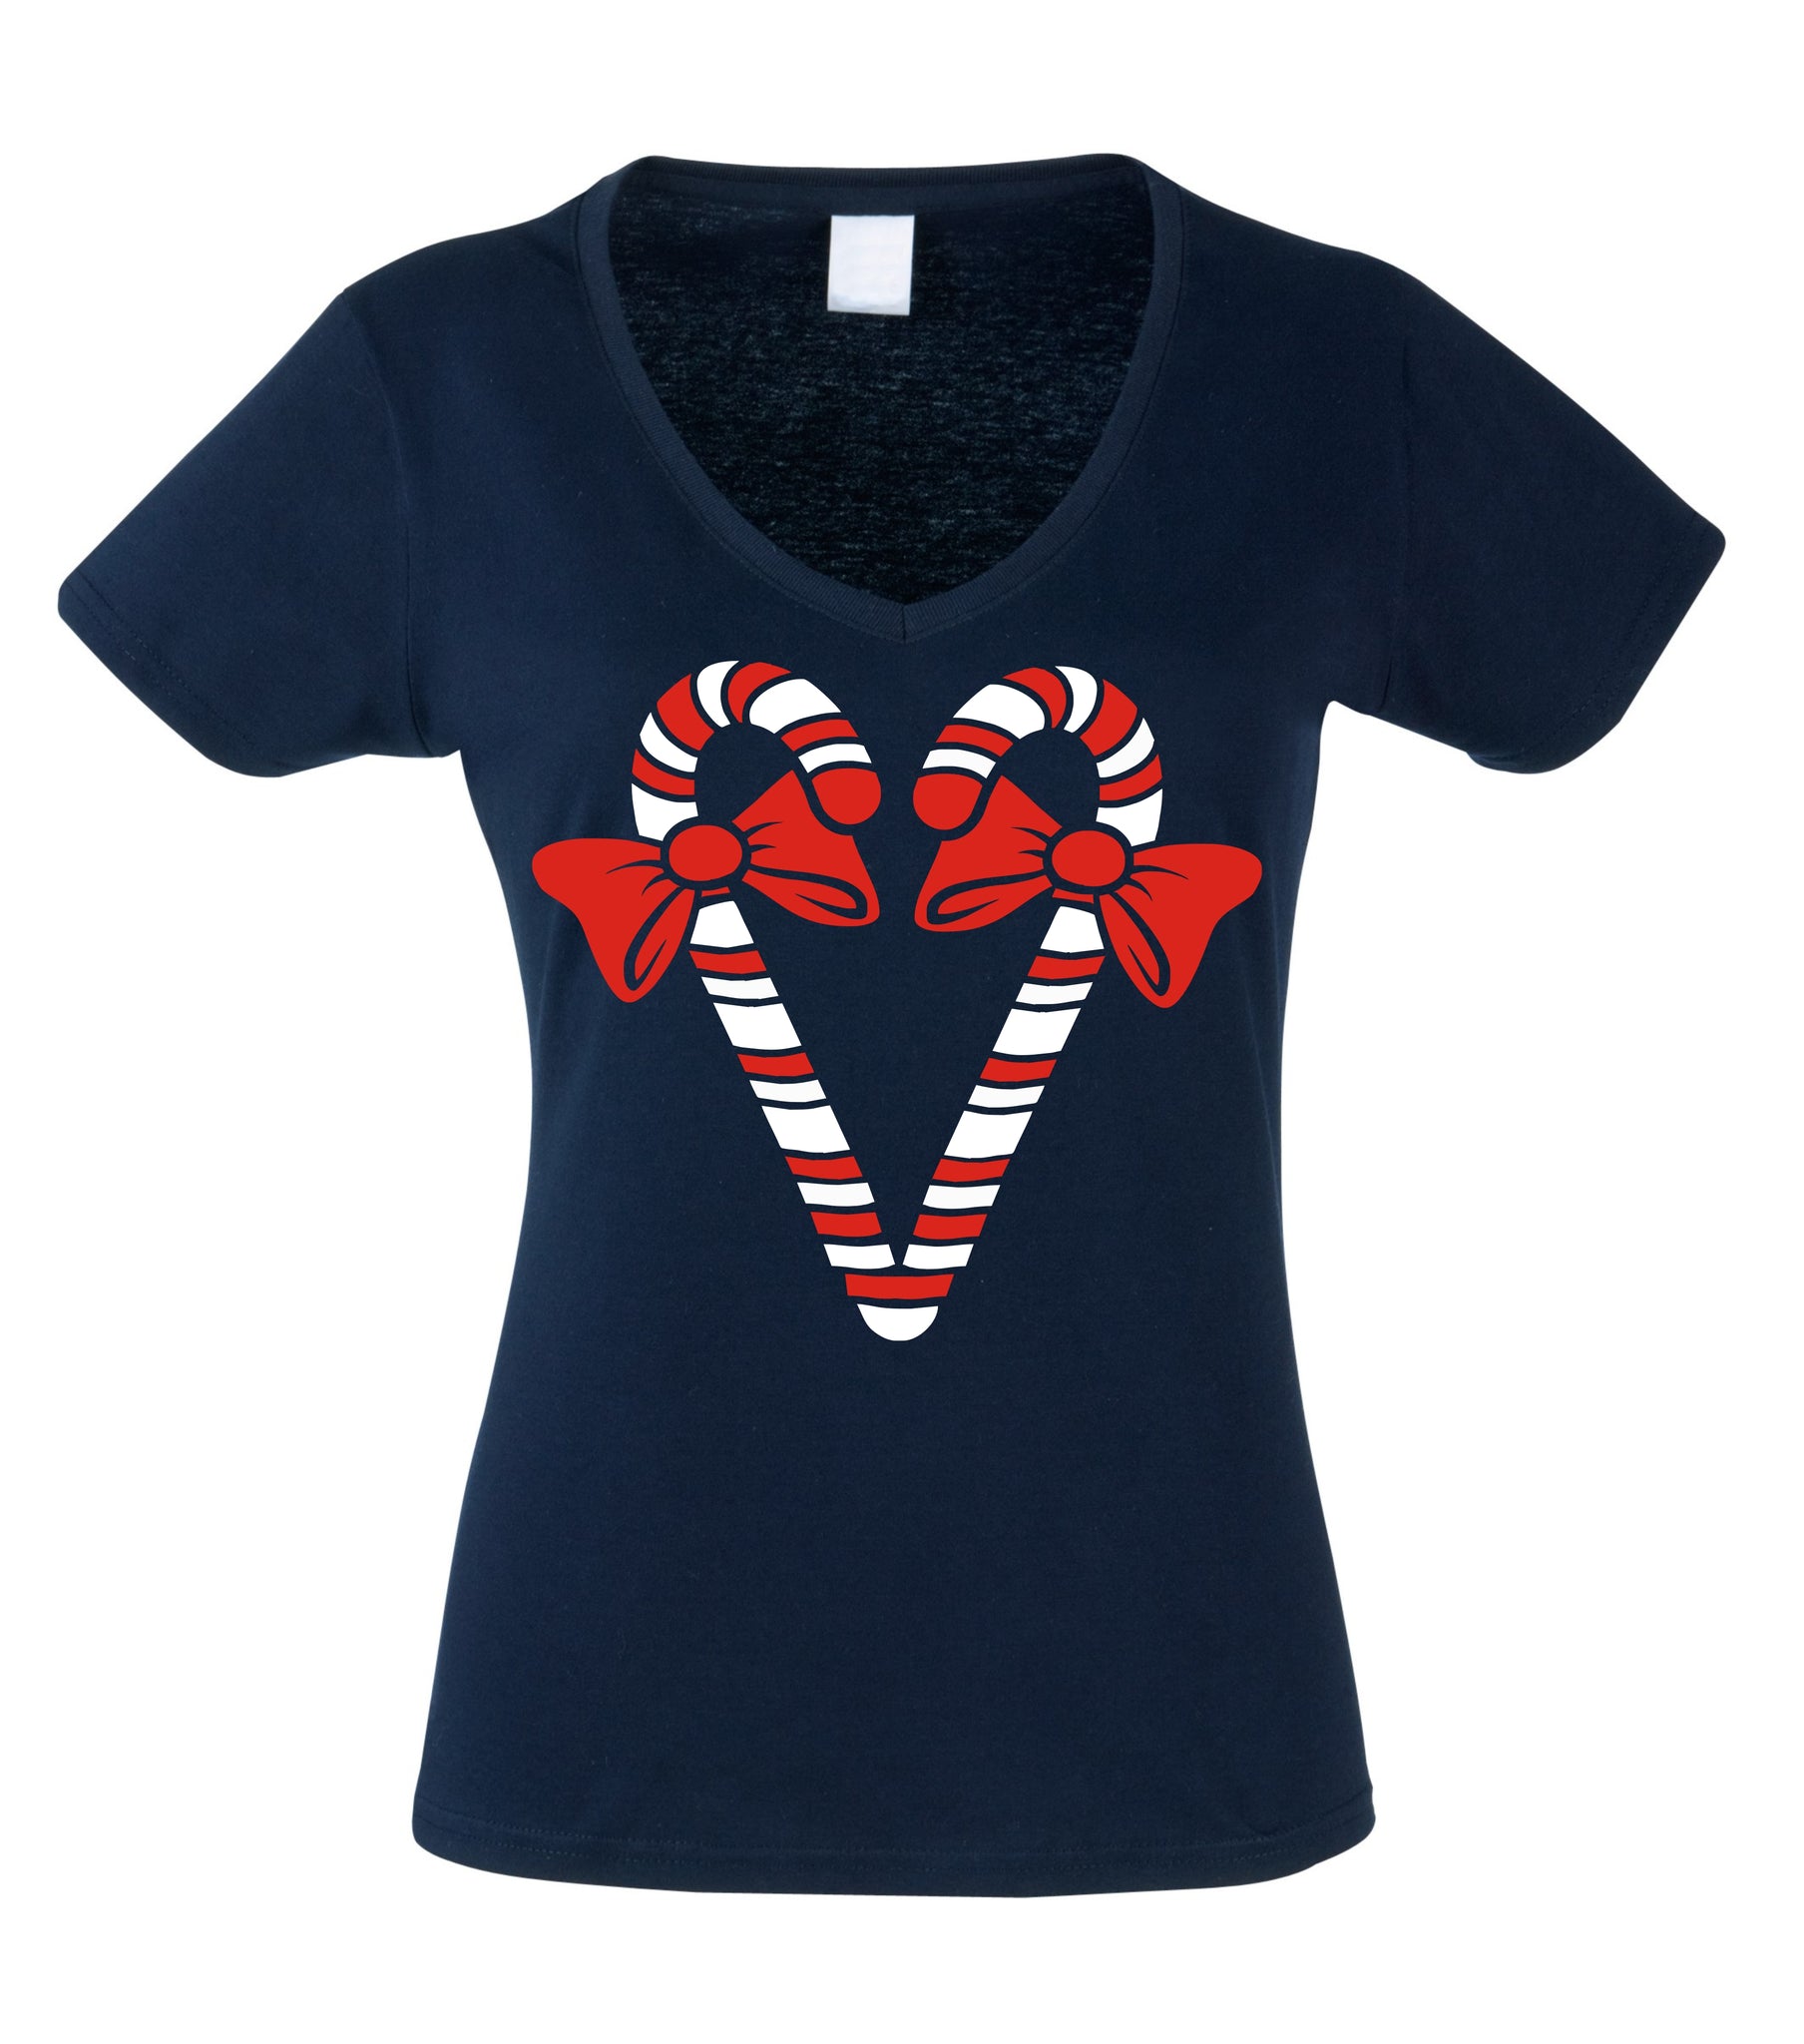 Candy Cane Vneck Women's T-shirt (One Size)